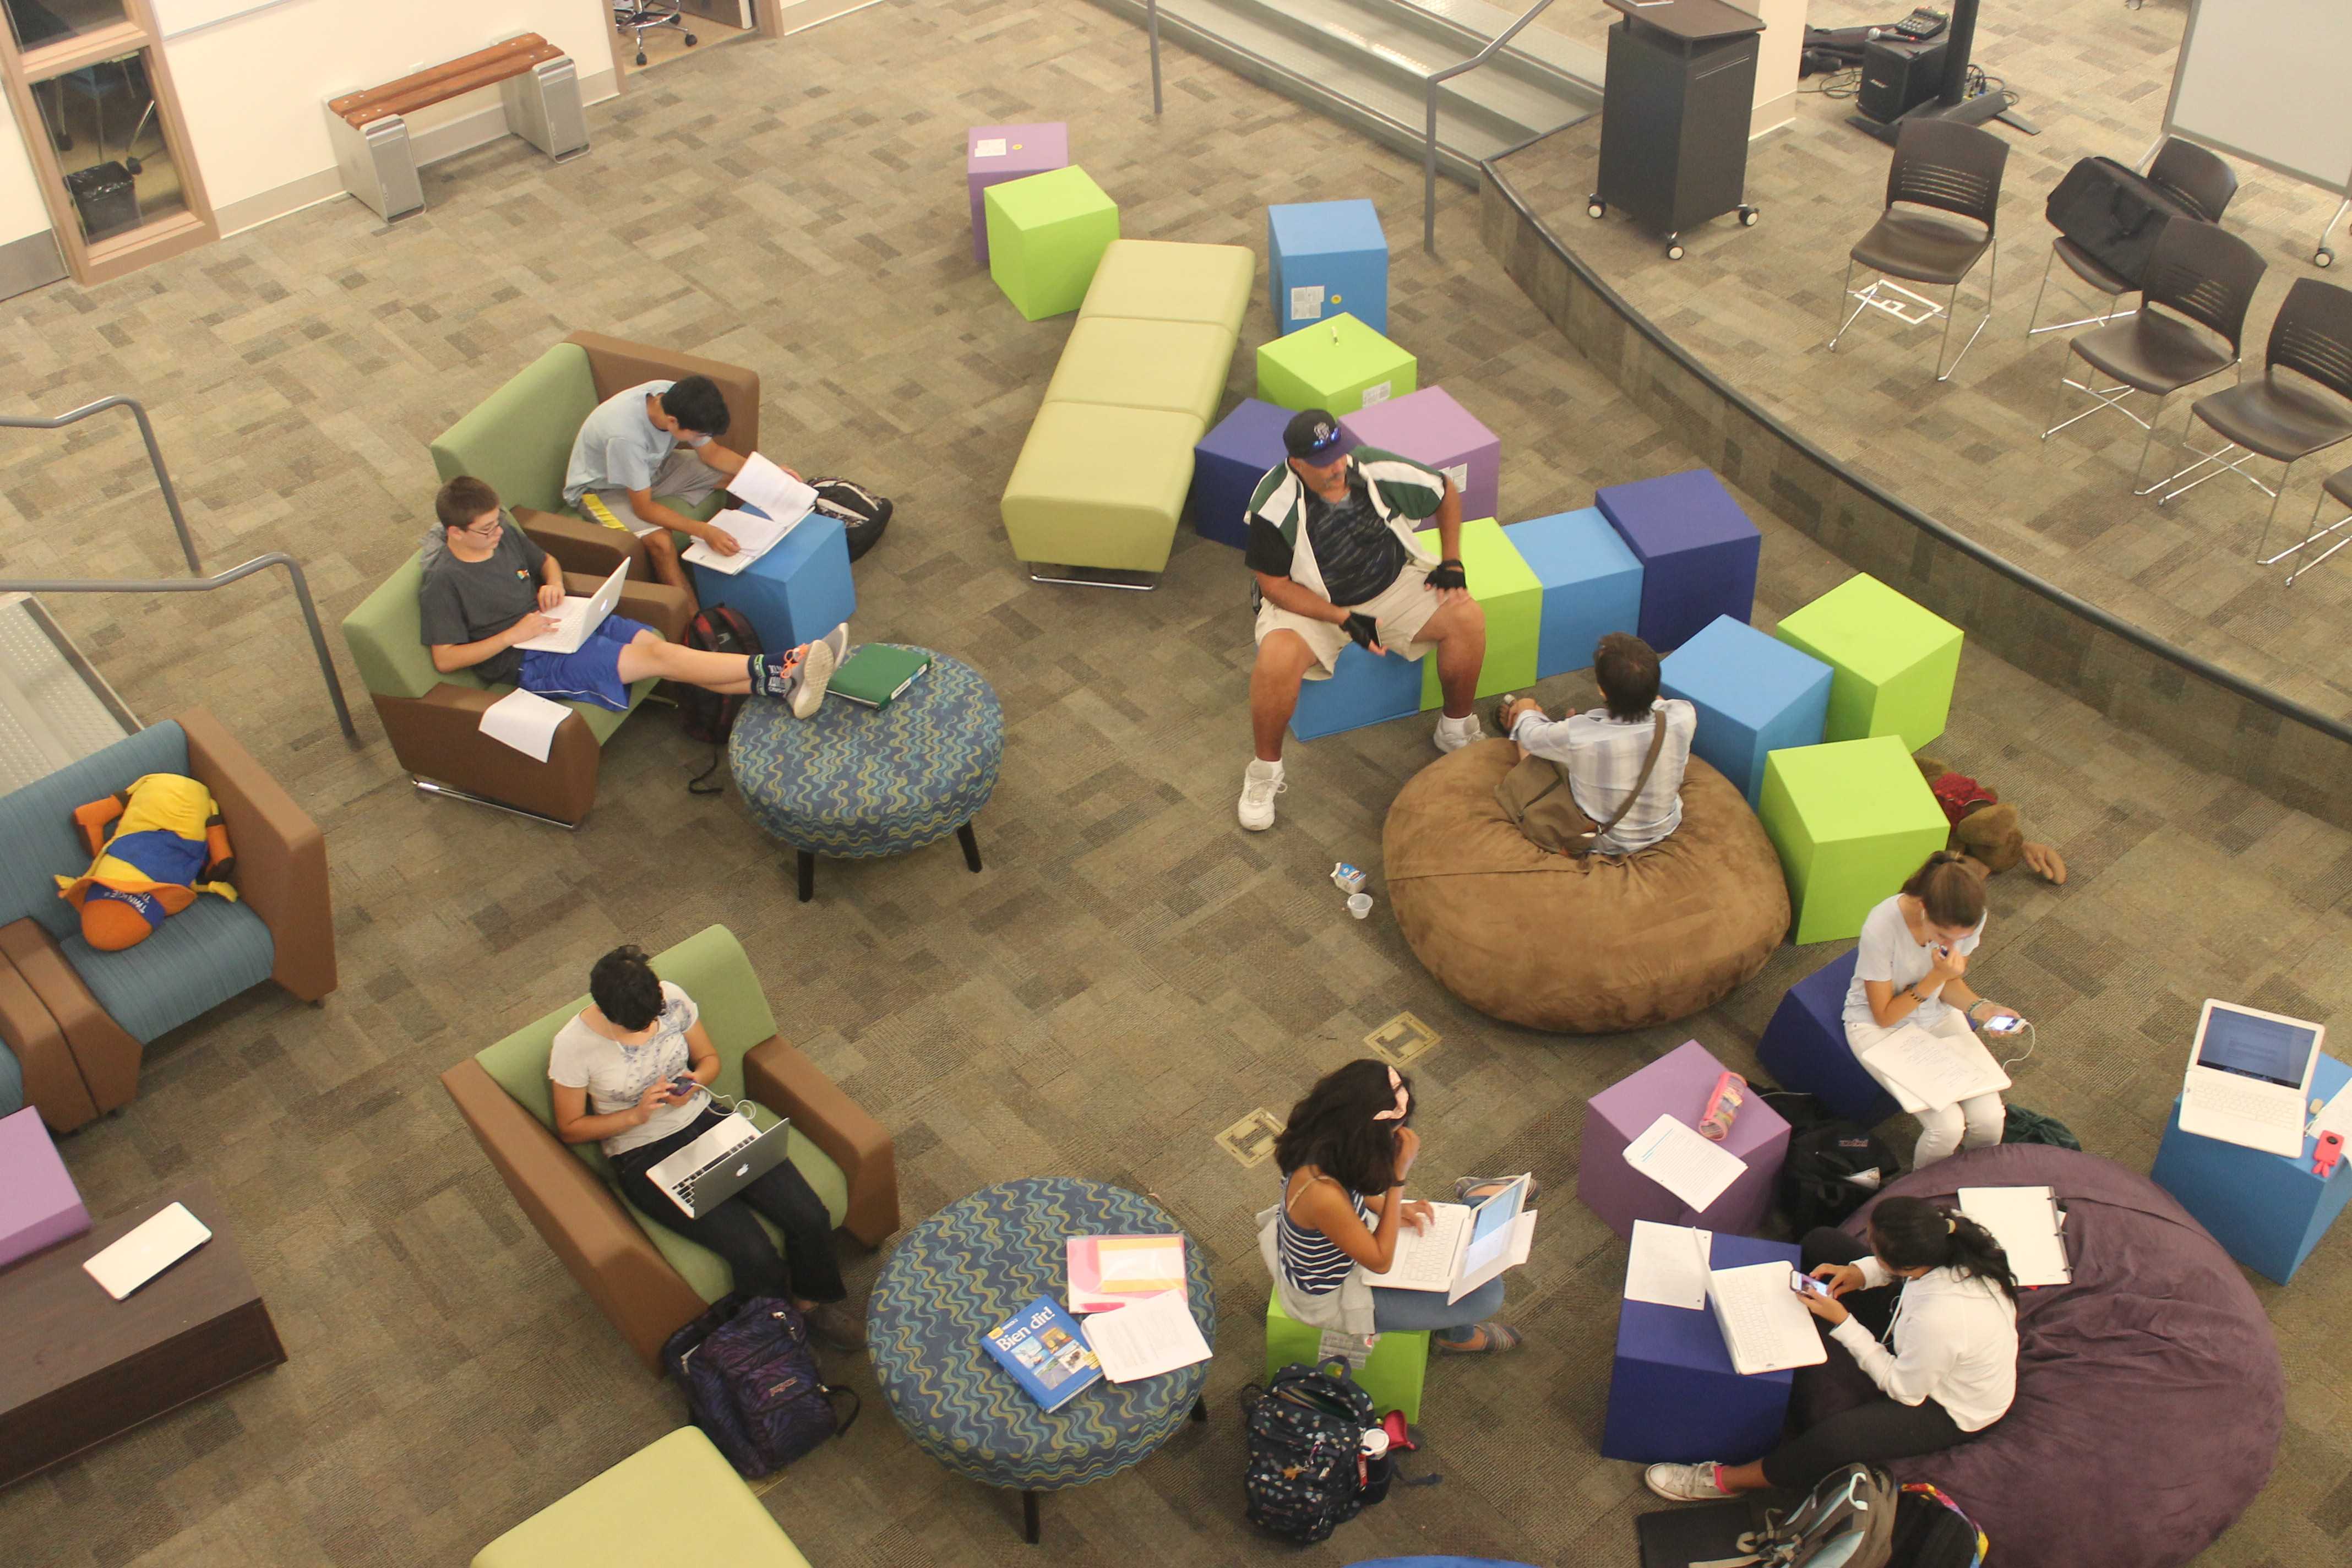 Students enjoy the new, modern furniture of the Media Arts Center. Photo by Adele Bloch.